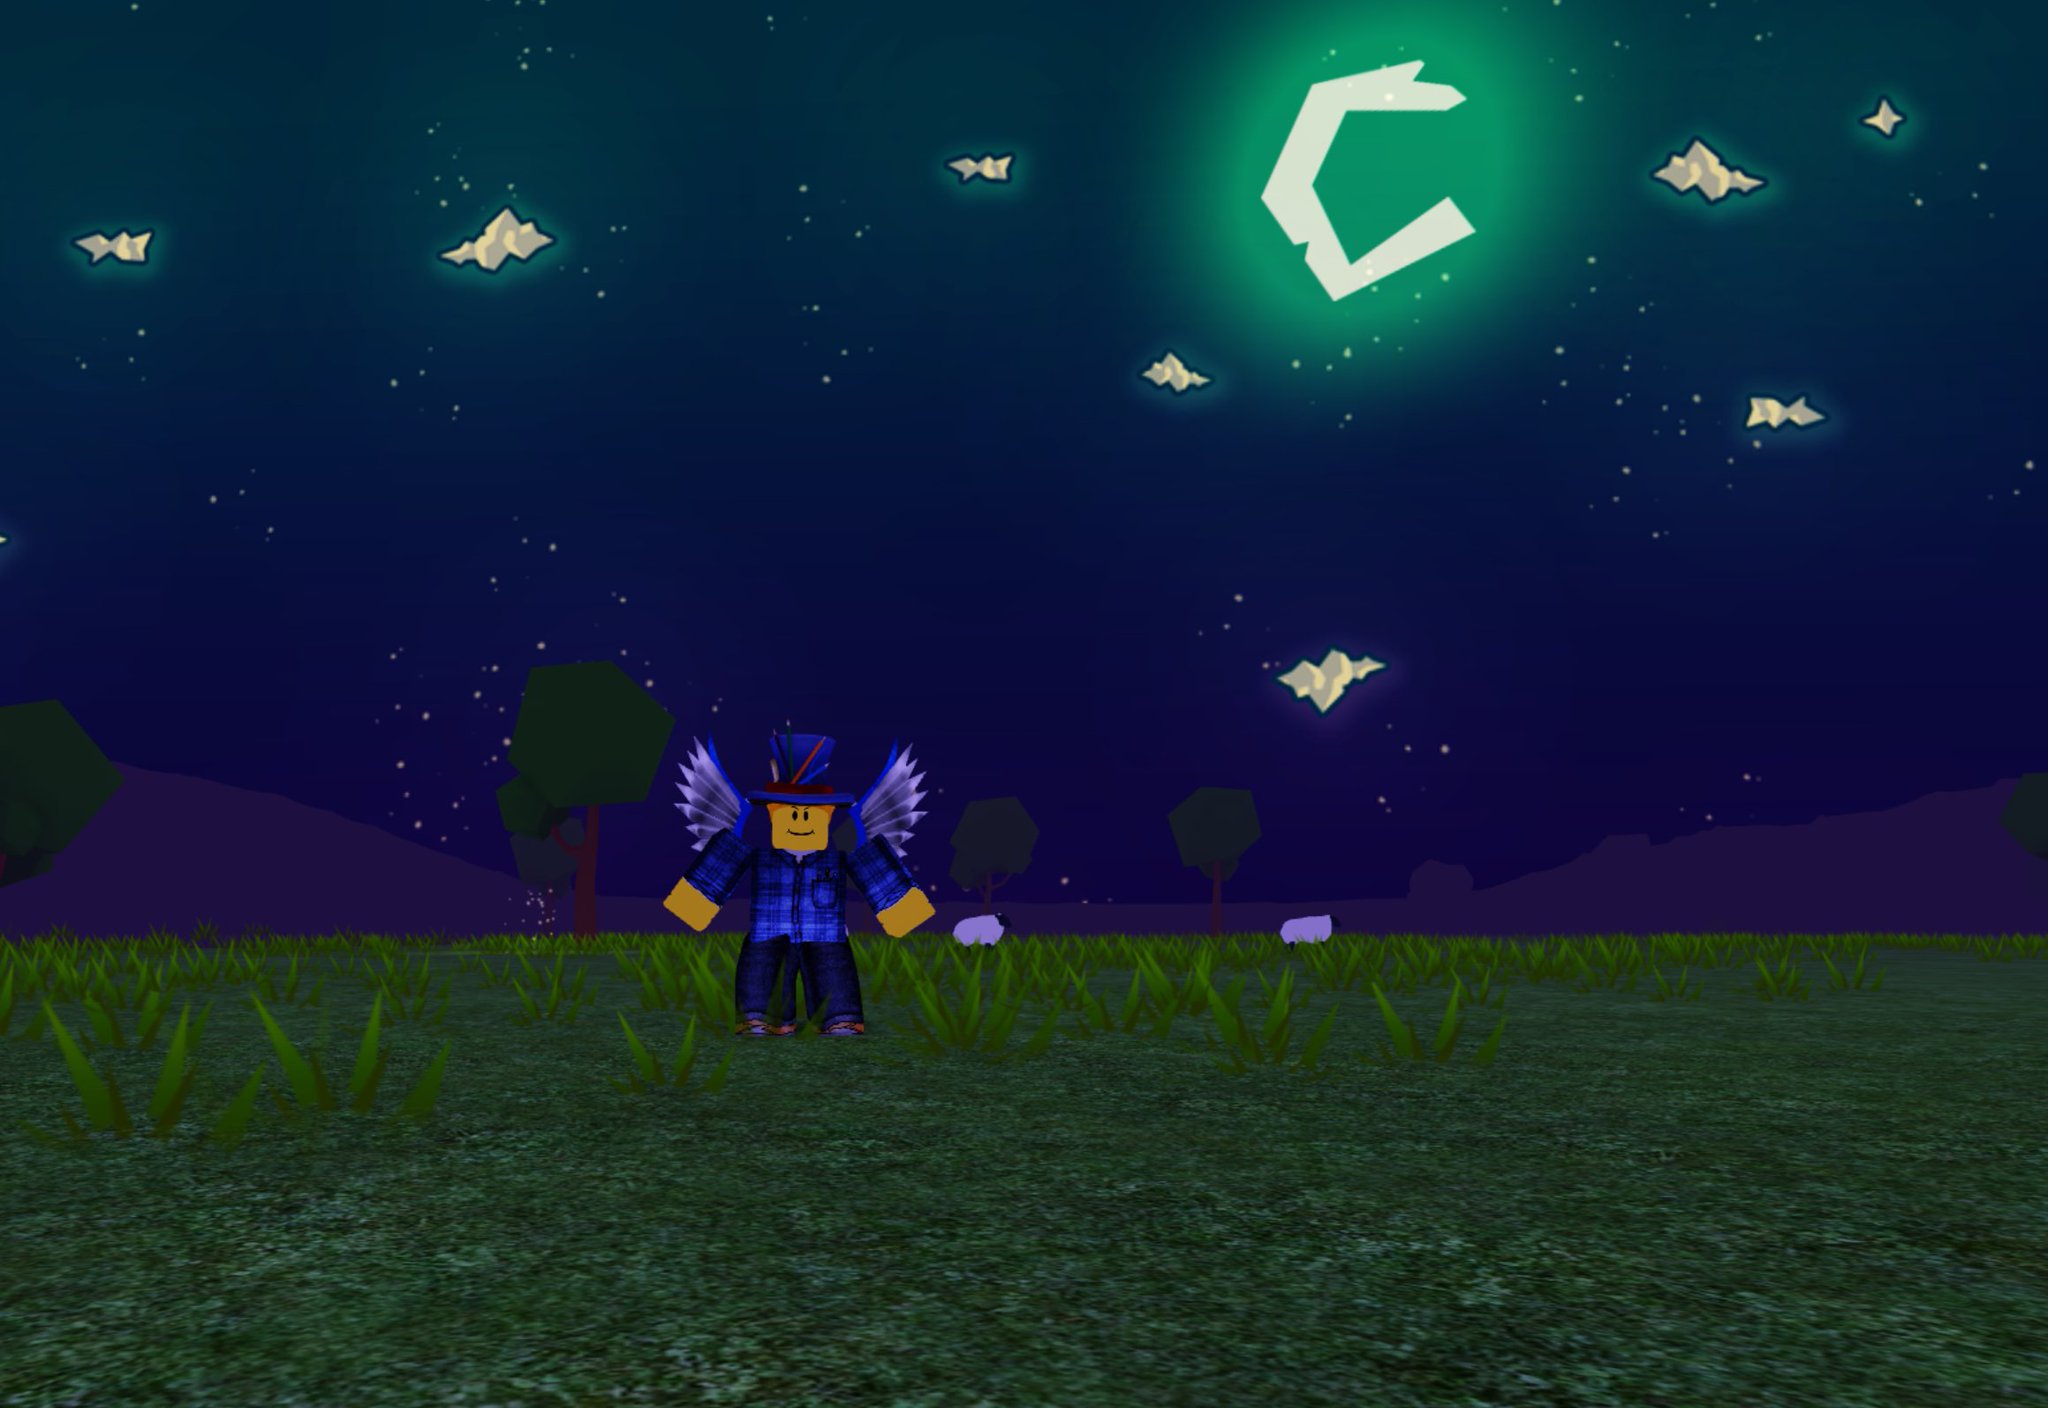 Cracky4 On Twitter I Ve Been Working On My First Ever Skybox It S Finally Started Looking Pretty Good - cracky4roblox